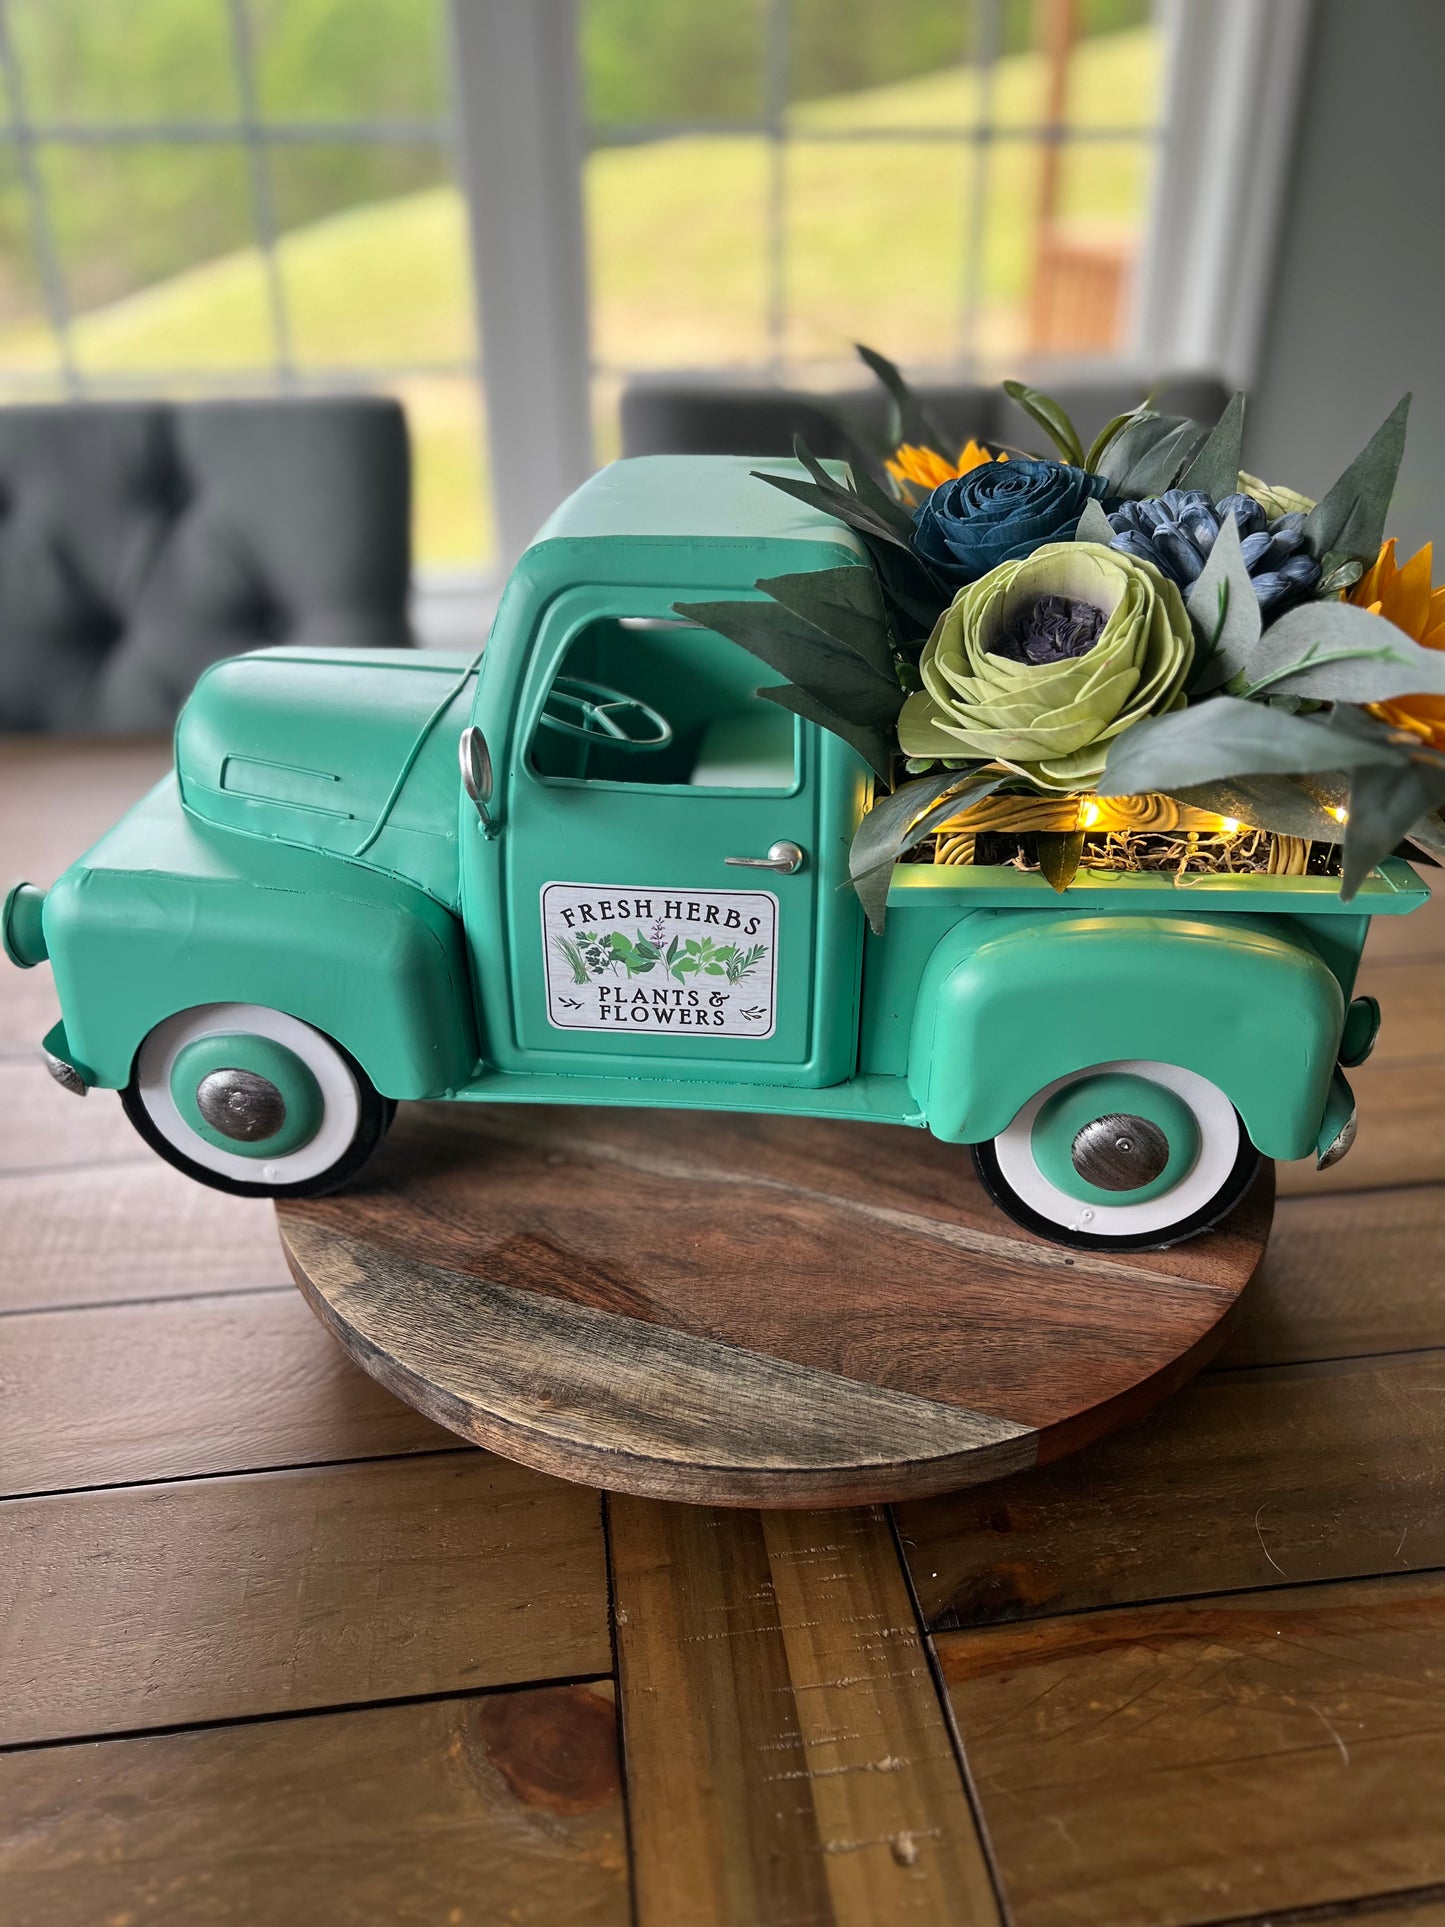 TEAL TRUCK FLORAL ARRANGEMENT WITH WORKING LIGHT